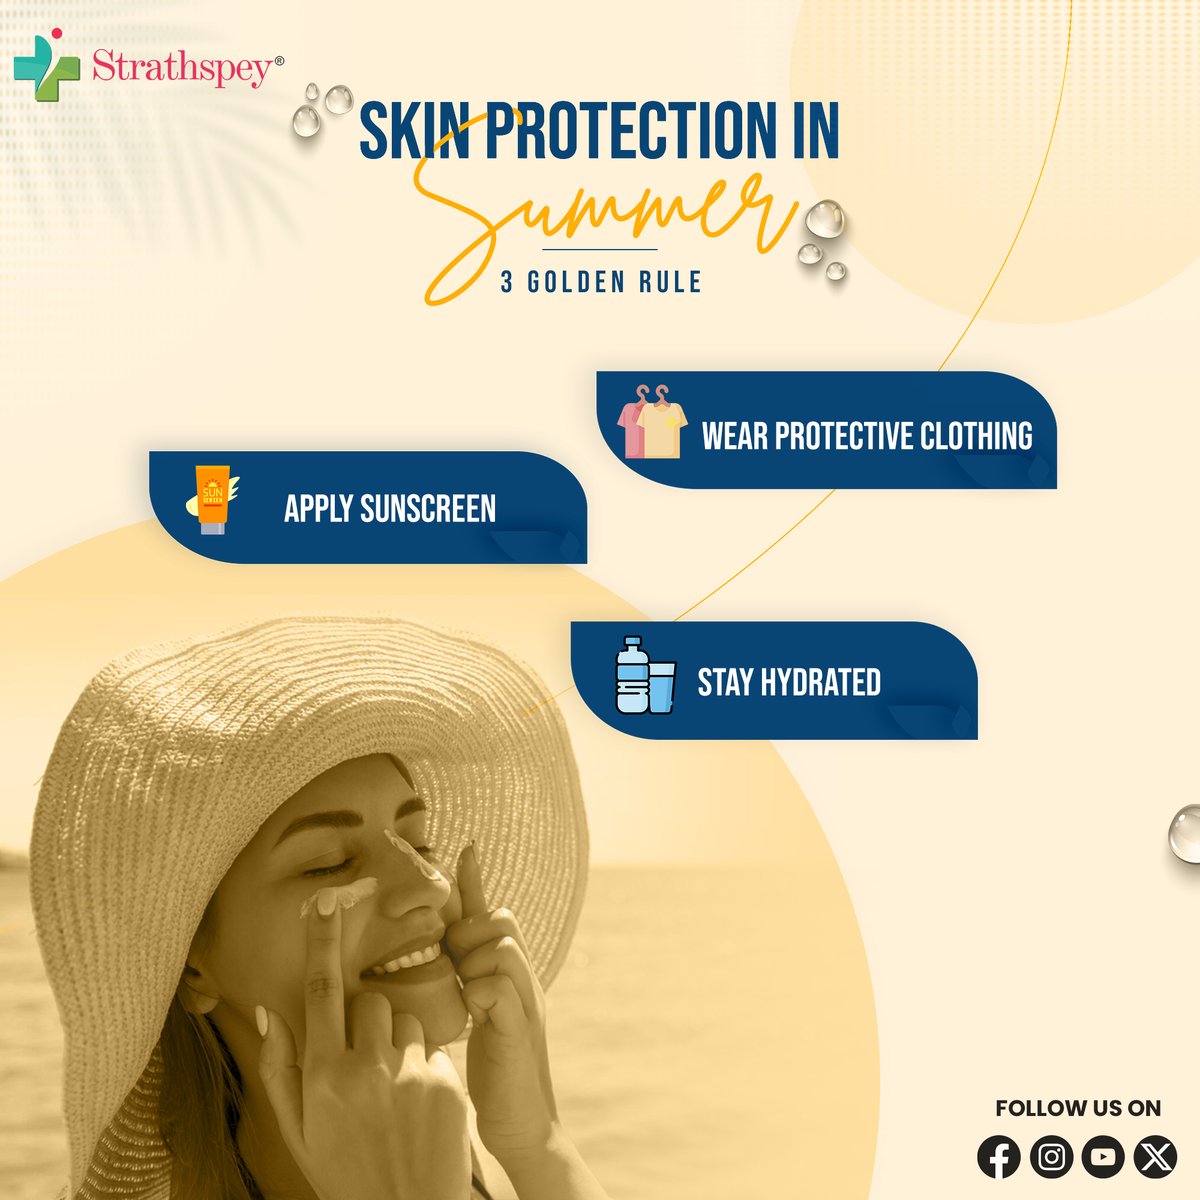 Beat the summer heat with these 3 essential rules for skin care! 📷📷
..
.
#strathspey #strathspeylabspvt #summer #skincare #sunscreen